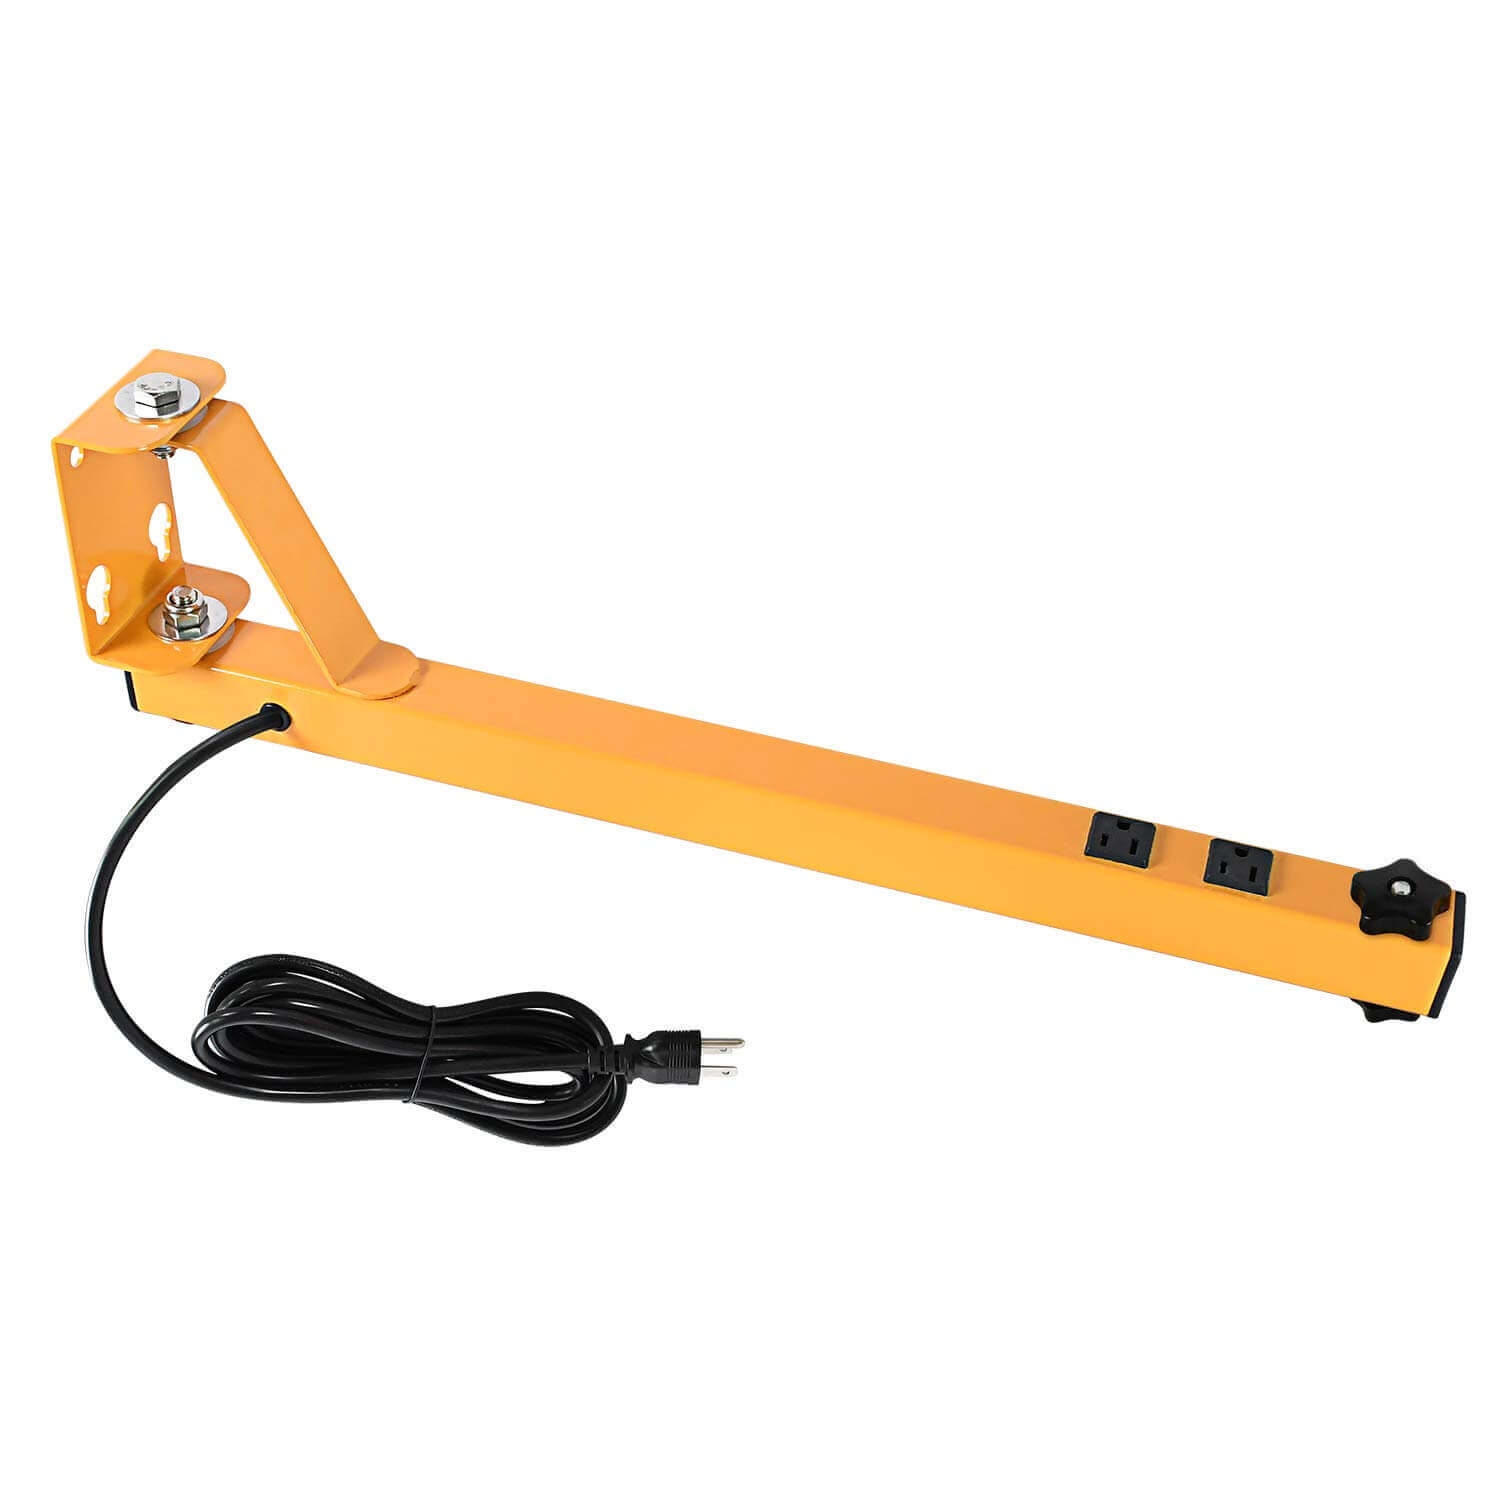 MCWOFI 24IN Mounting Arm for Loading Dock Light Fan Arm,Used with All Available Dock Light/ Fan Modular Light Head Options, 7ft Cordset, 120 Volt, Yellow with 2 Sockets